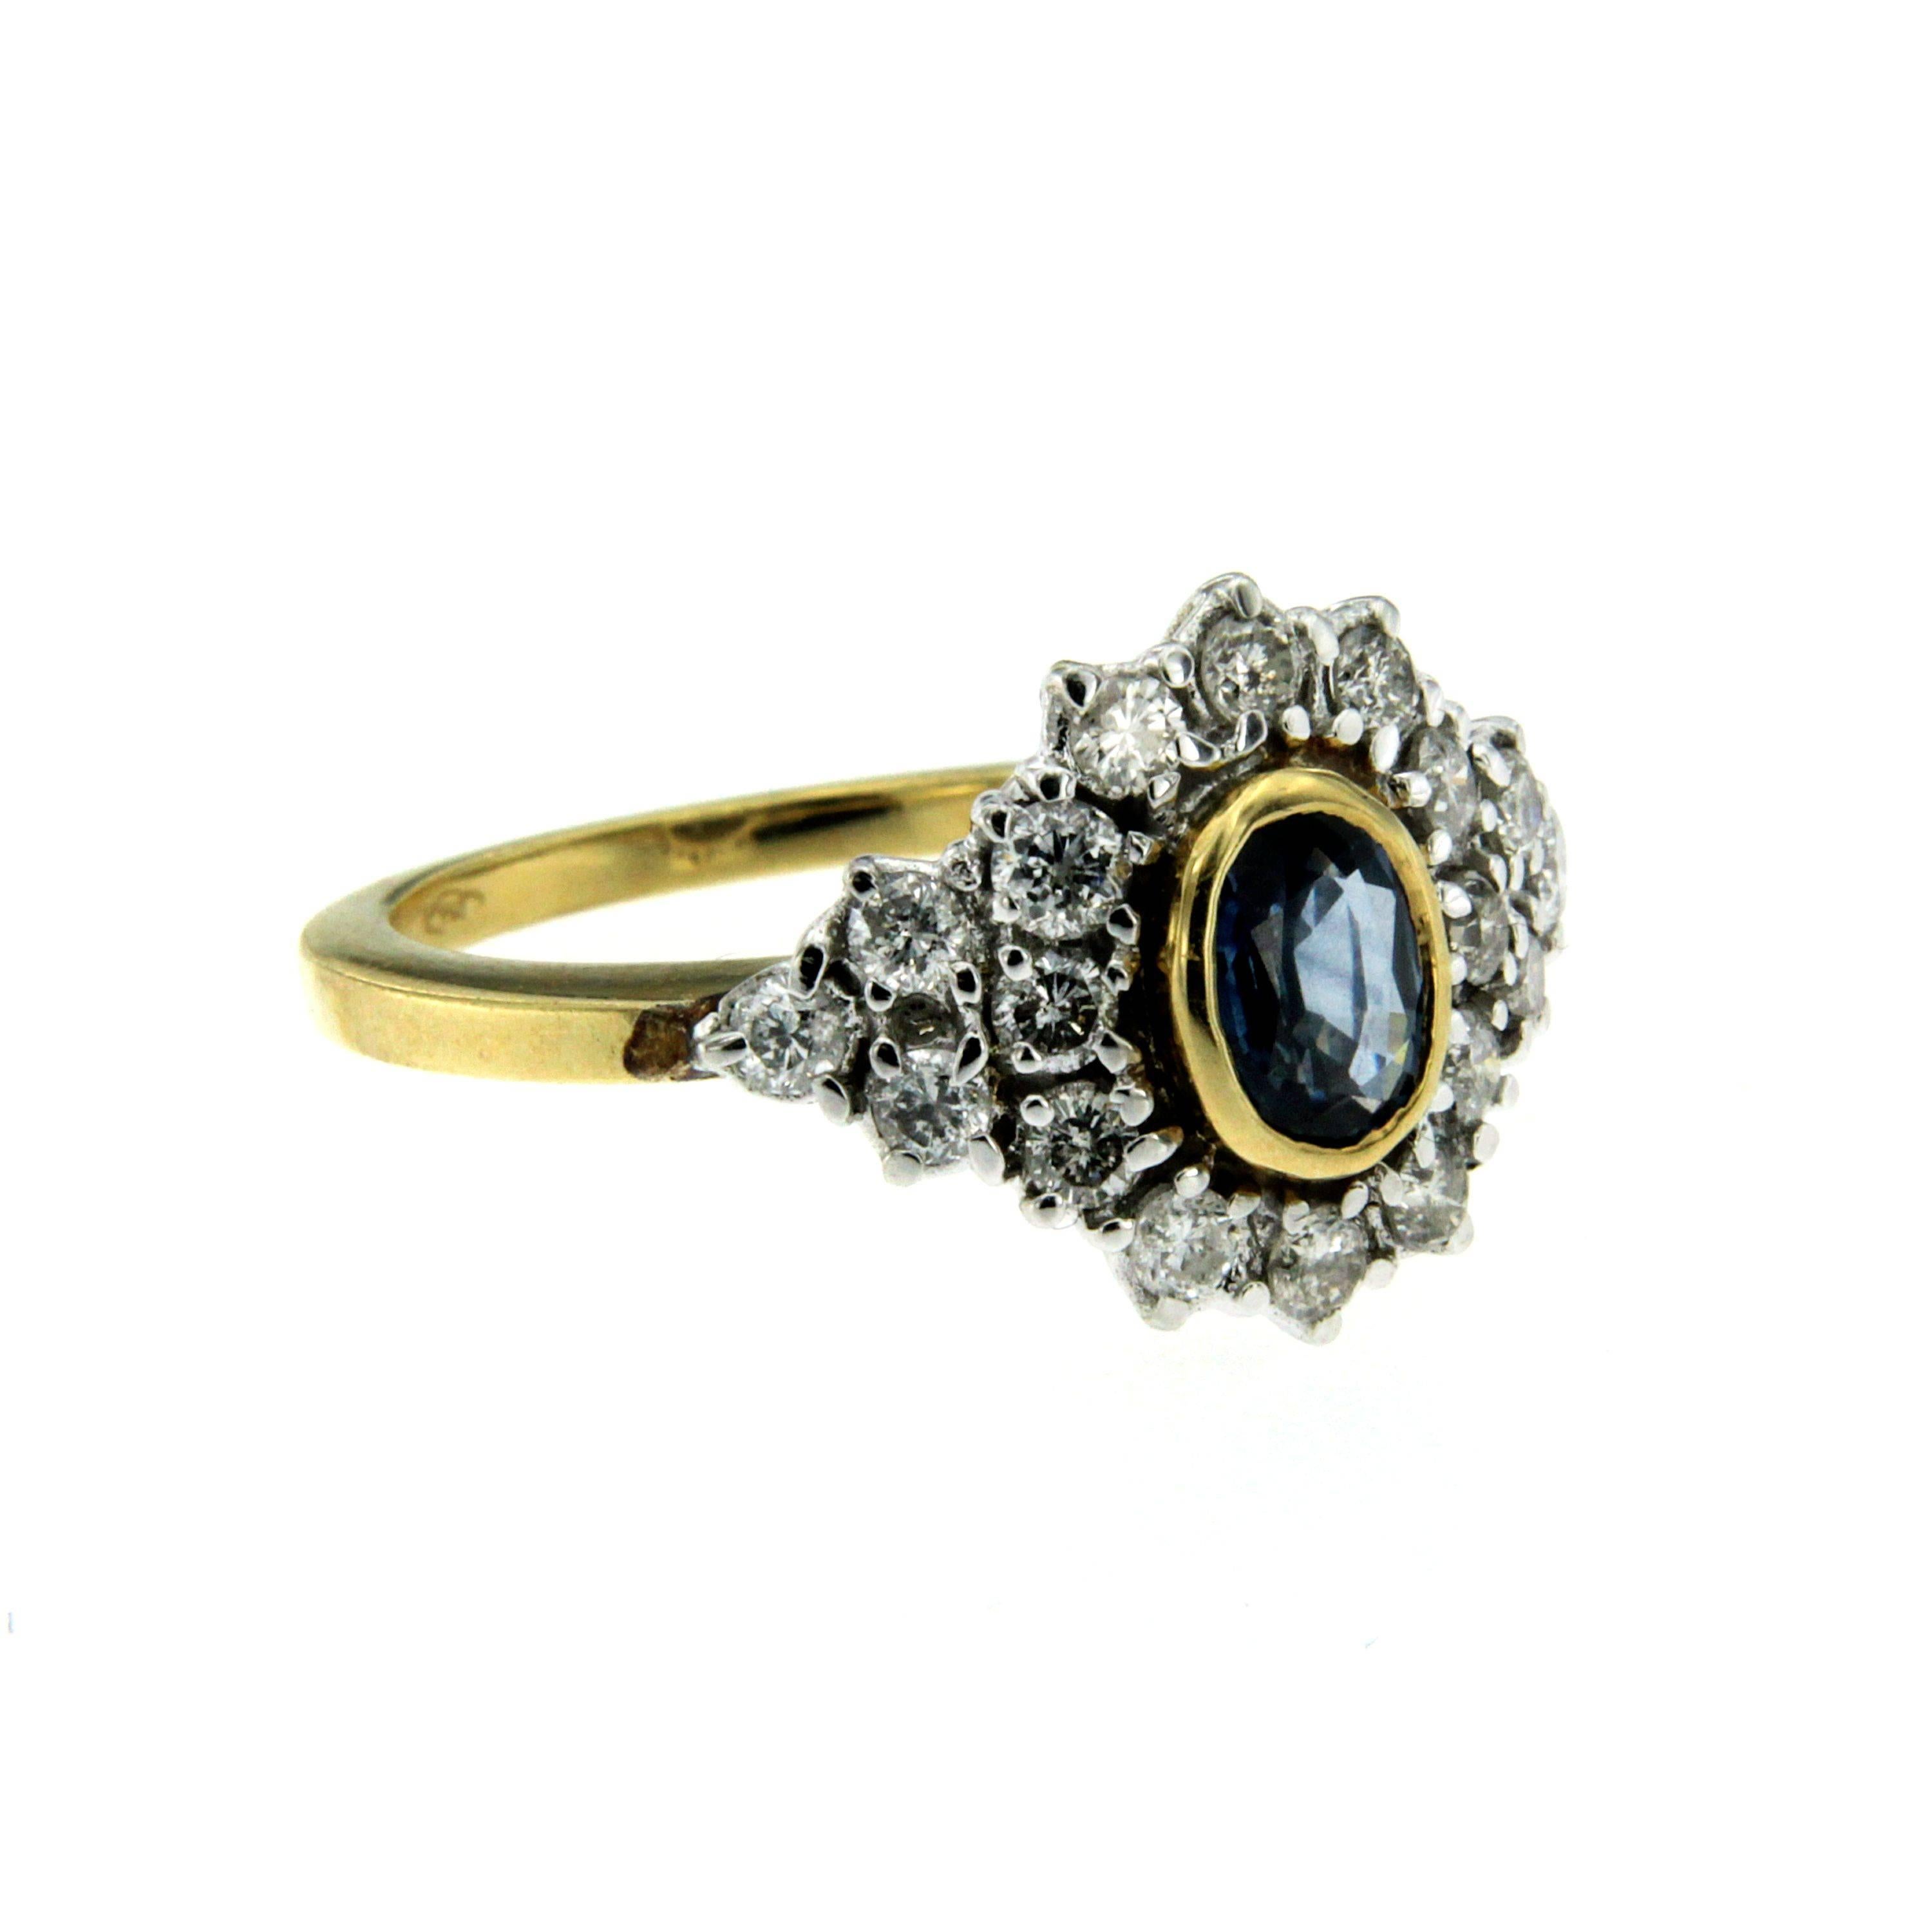 A beautiful sapphire and diamond ring, set with an oval cut Ceylon natural Sapphire, weighing approx. 1.00 ct embellished with round brilliant cut diamonds, weighing approx. total of 1.40 cts. Mounted in 18k white and yellow gold. 

CONDITION: